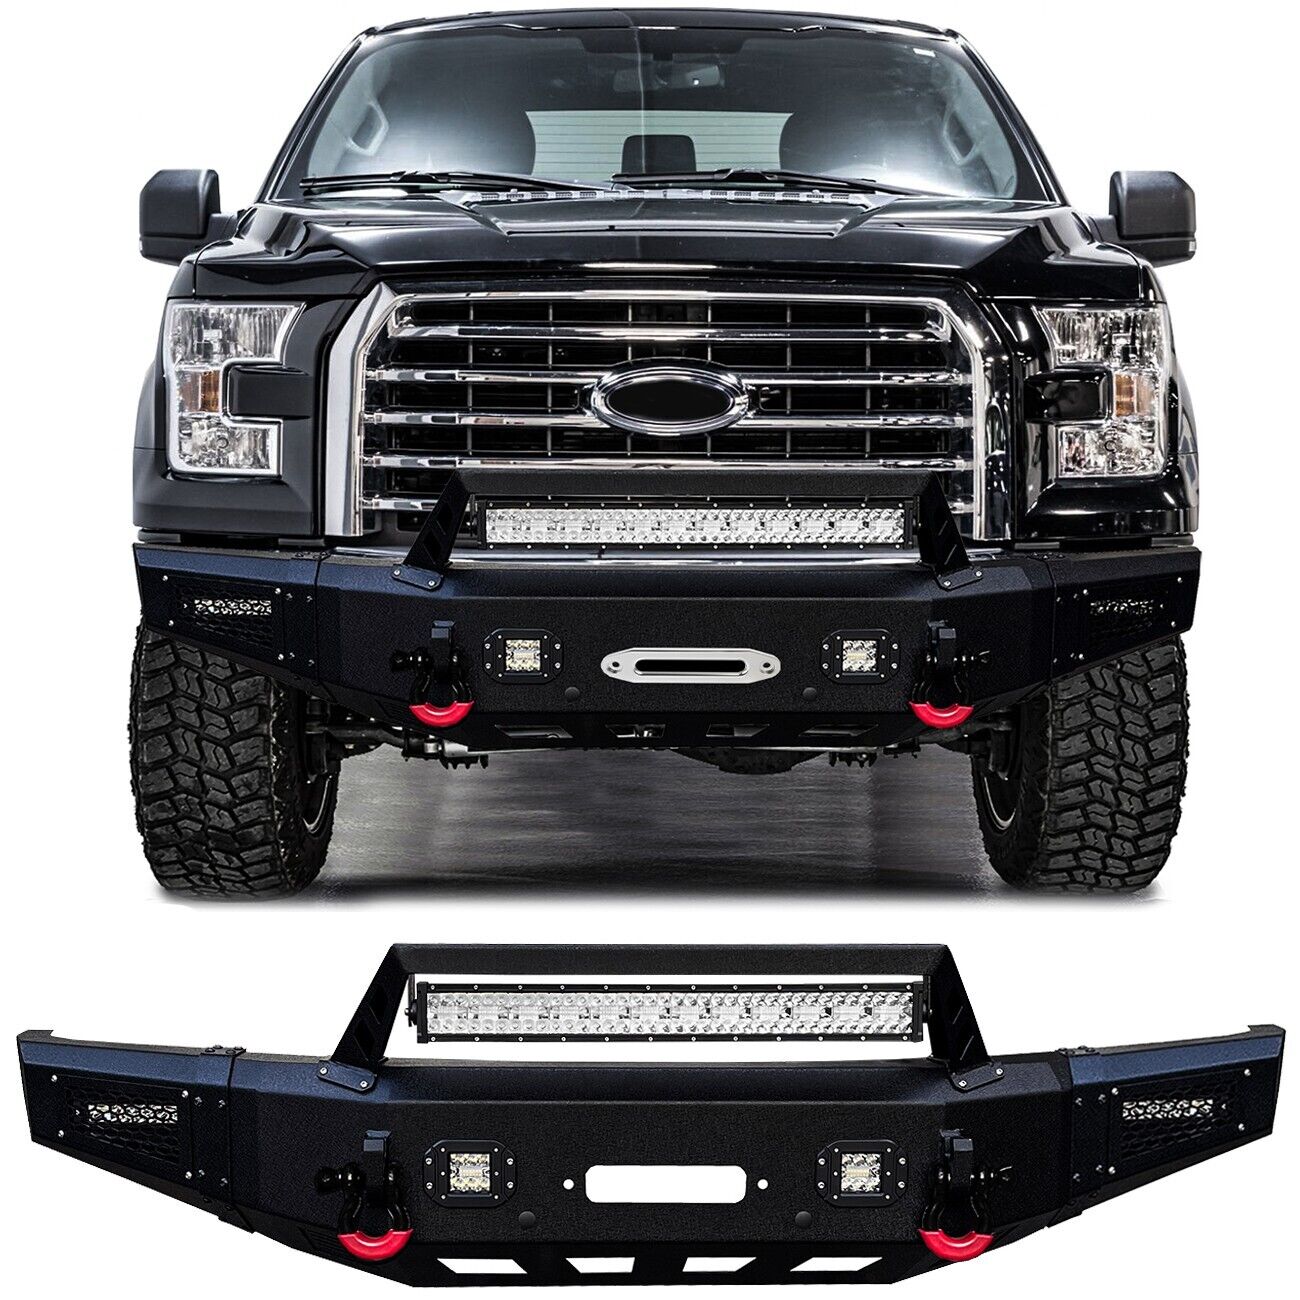 Vijay Fits Ford F150 2015-2017 New Assembly Steel Front Bumper with LED Lights